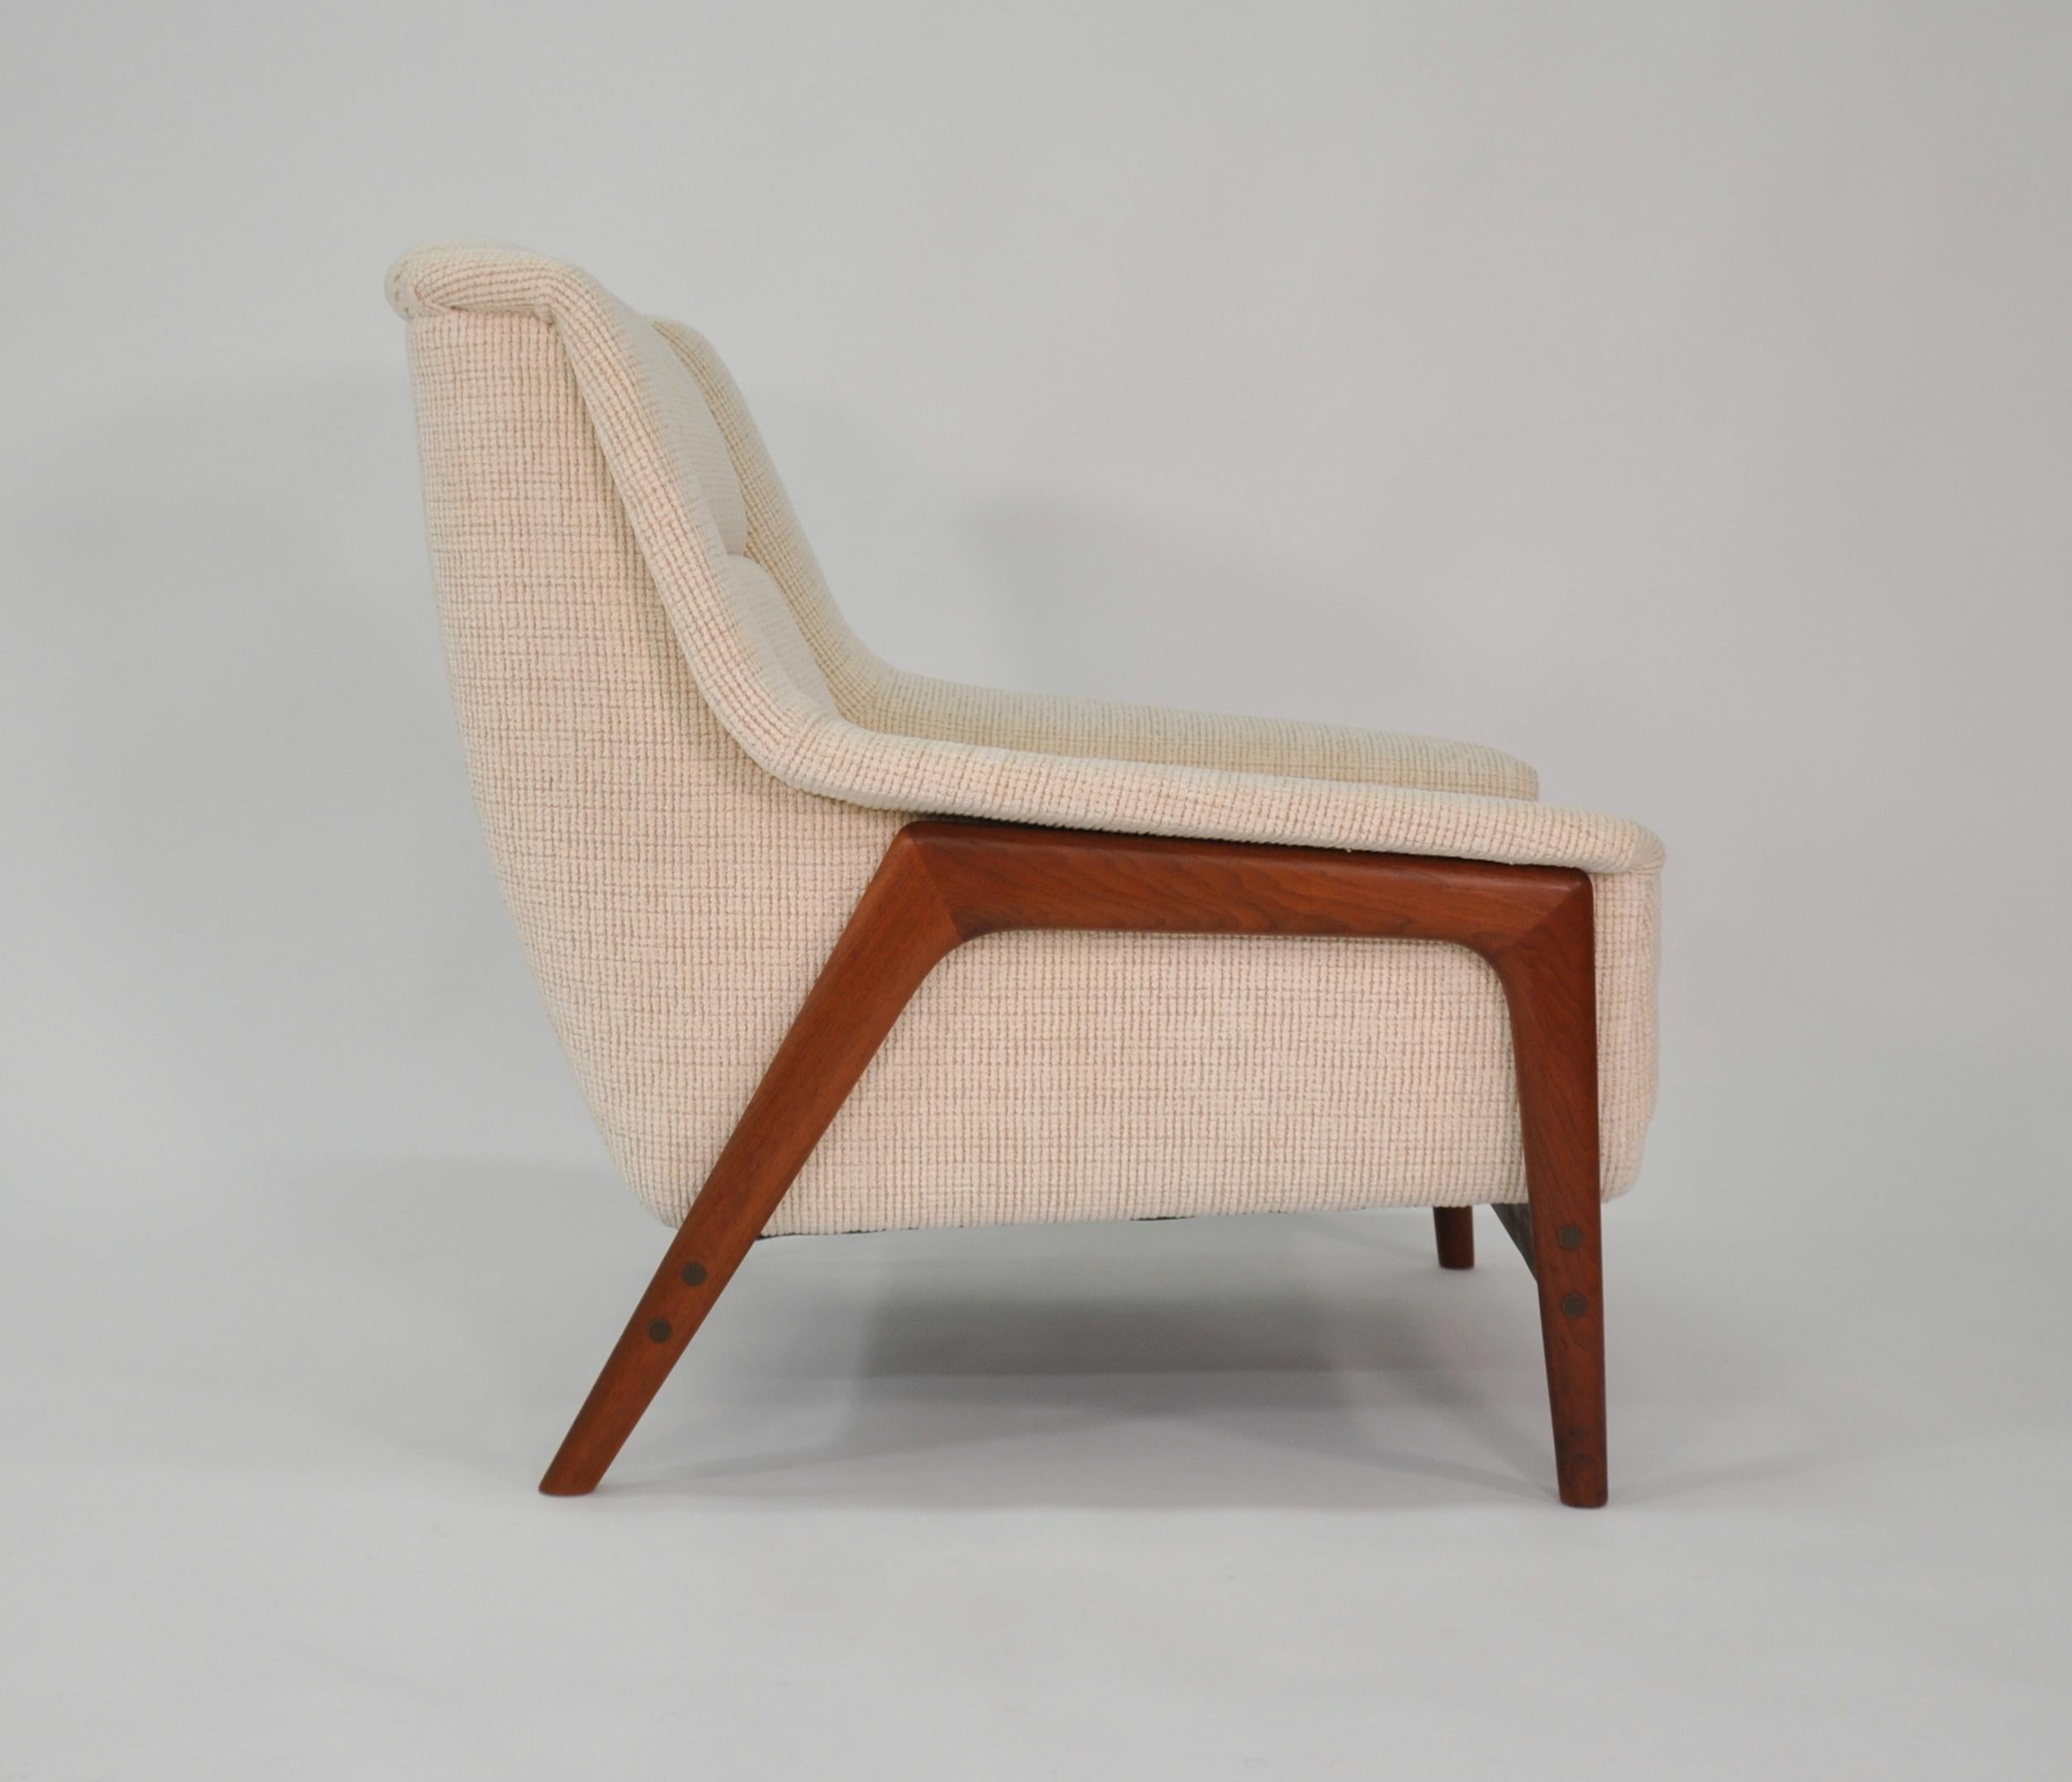 Beautiful newly reupholstered easy chair designed in the 1960s by Folke Ohlsson for Dux. The Profil armchair features an exposed sculptural solid teak frame. The club chair has been fully reupholstered in a soft, neutral off-white cream chenille.